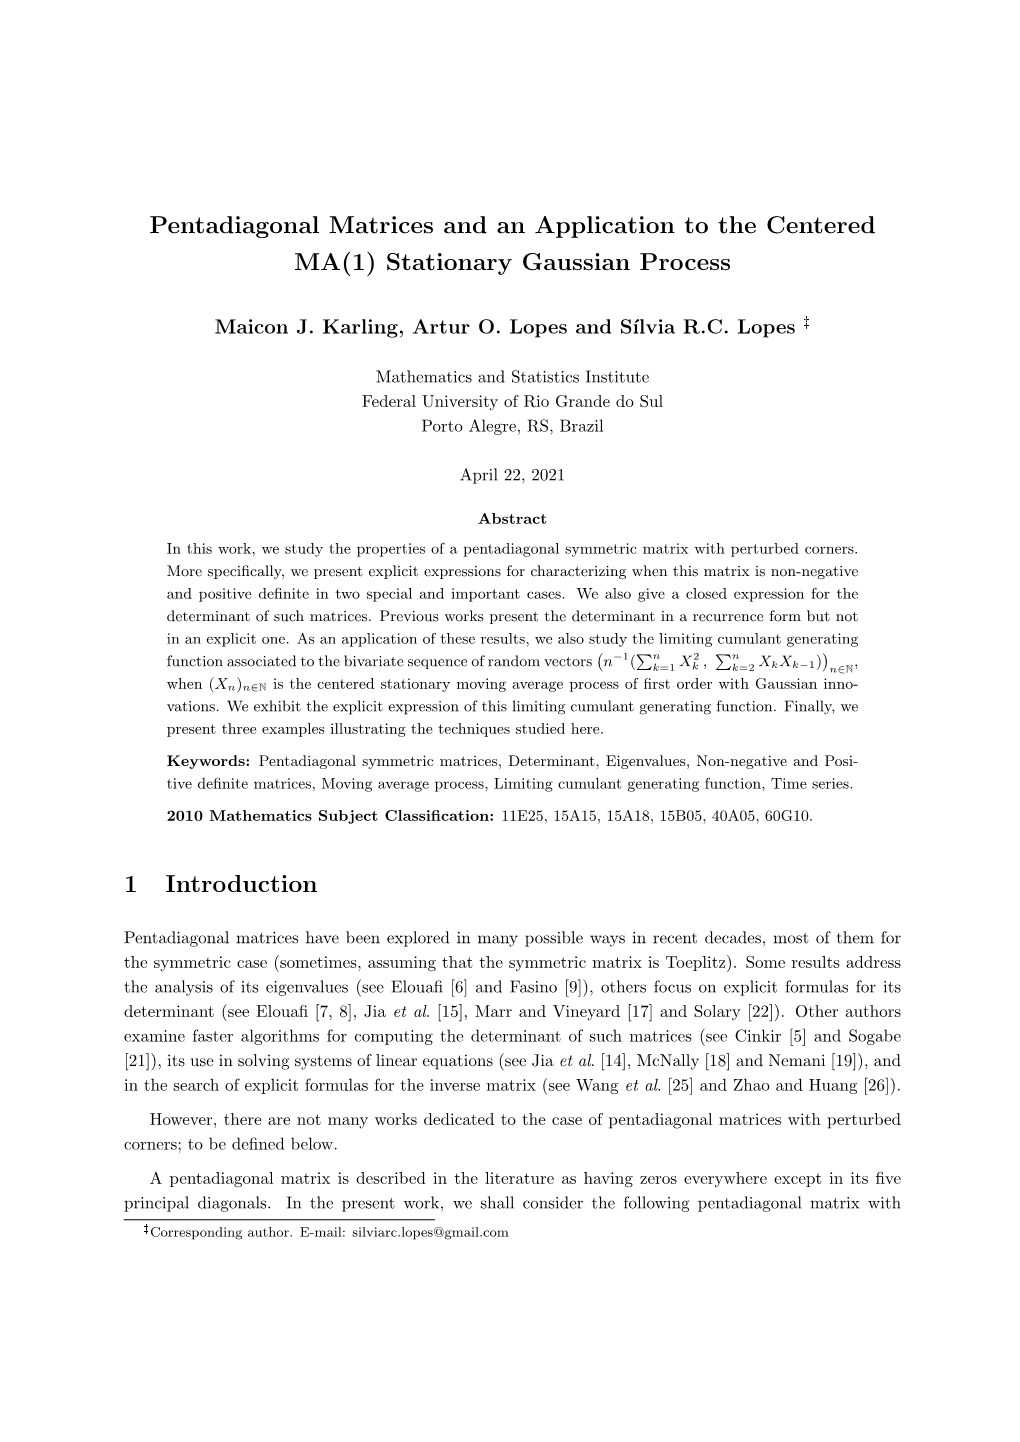 Pentadiagonal Matrices and an Application to the Centered MA(1) Stationary Gaussian Process